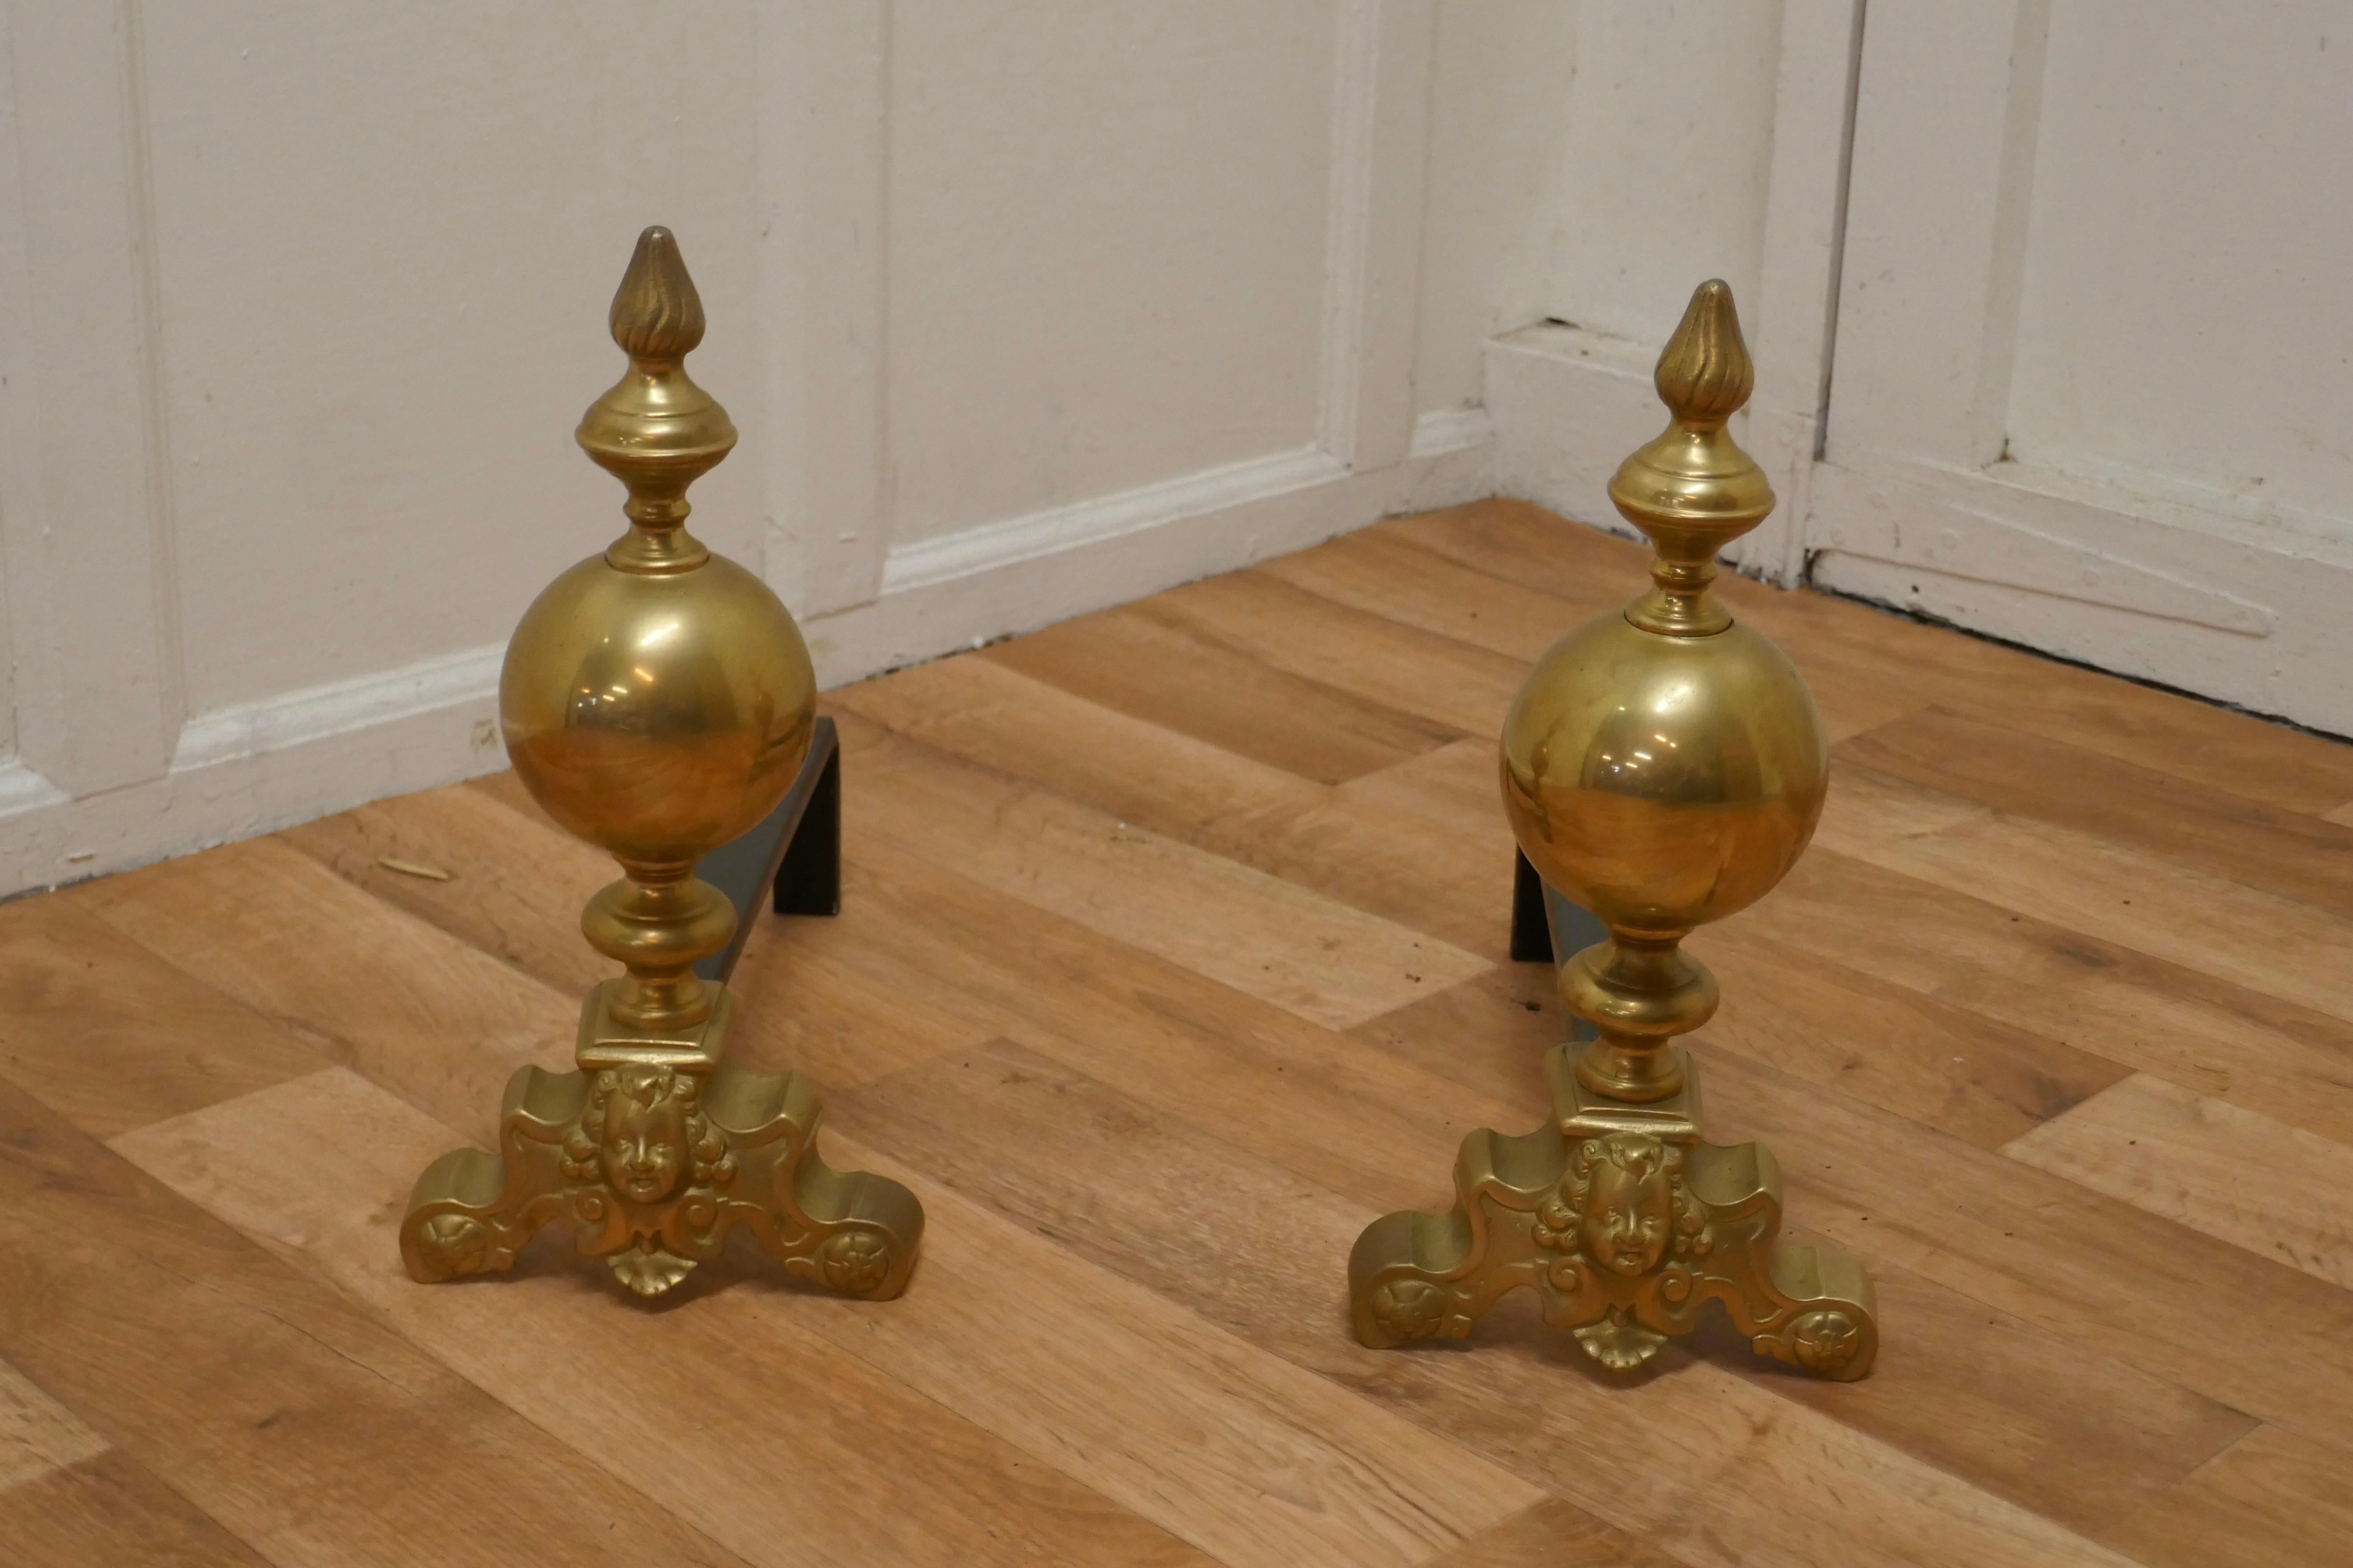 Large pair of French brass andirons, fire dogs or chenets

This is a Large globe shaped pair of Brass Andirons they are decorated with Gothic faces in the centre of the large scroll feet
 
The Andirons are 15” high, 18” wide at the front and 16”